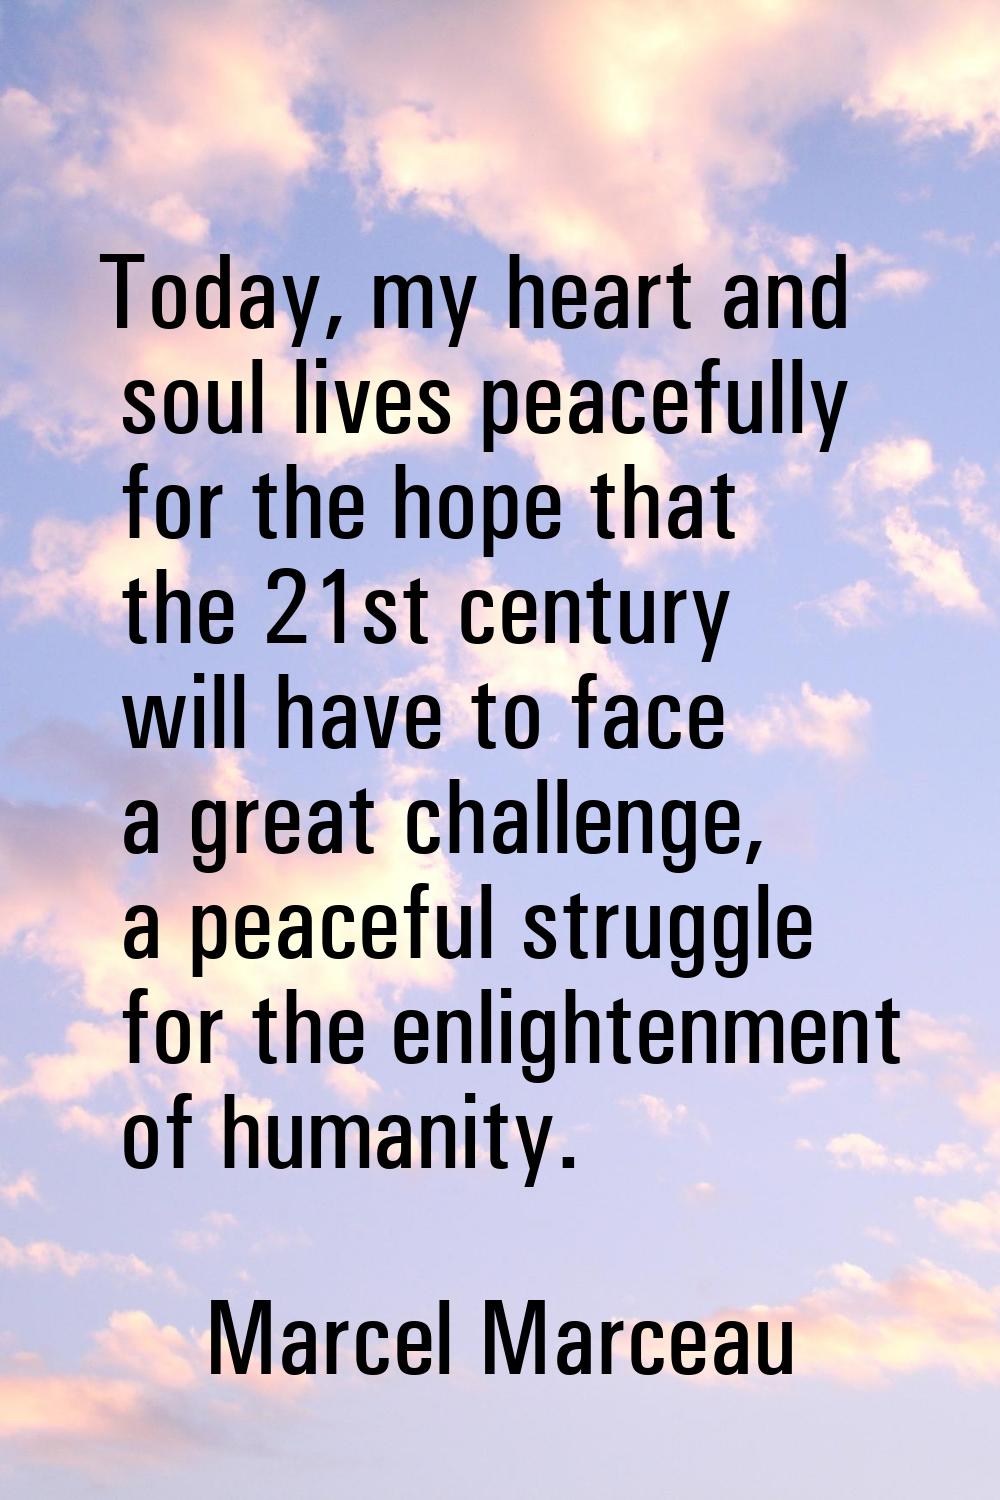 Today, my heart and soul lives peacefully for the hope that the 21st century will have to face a gr